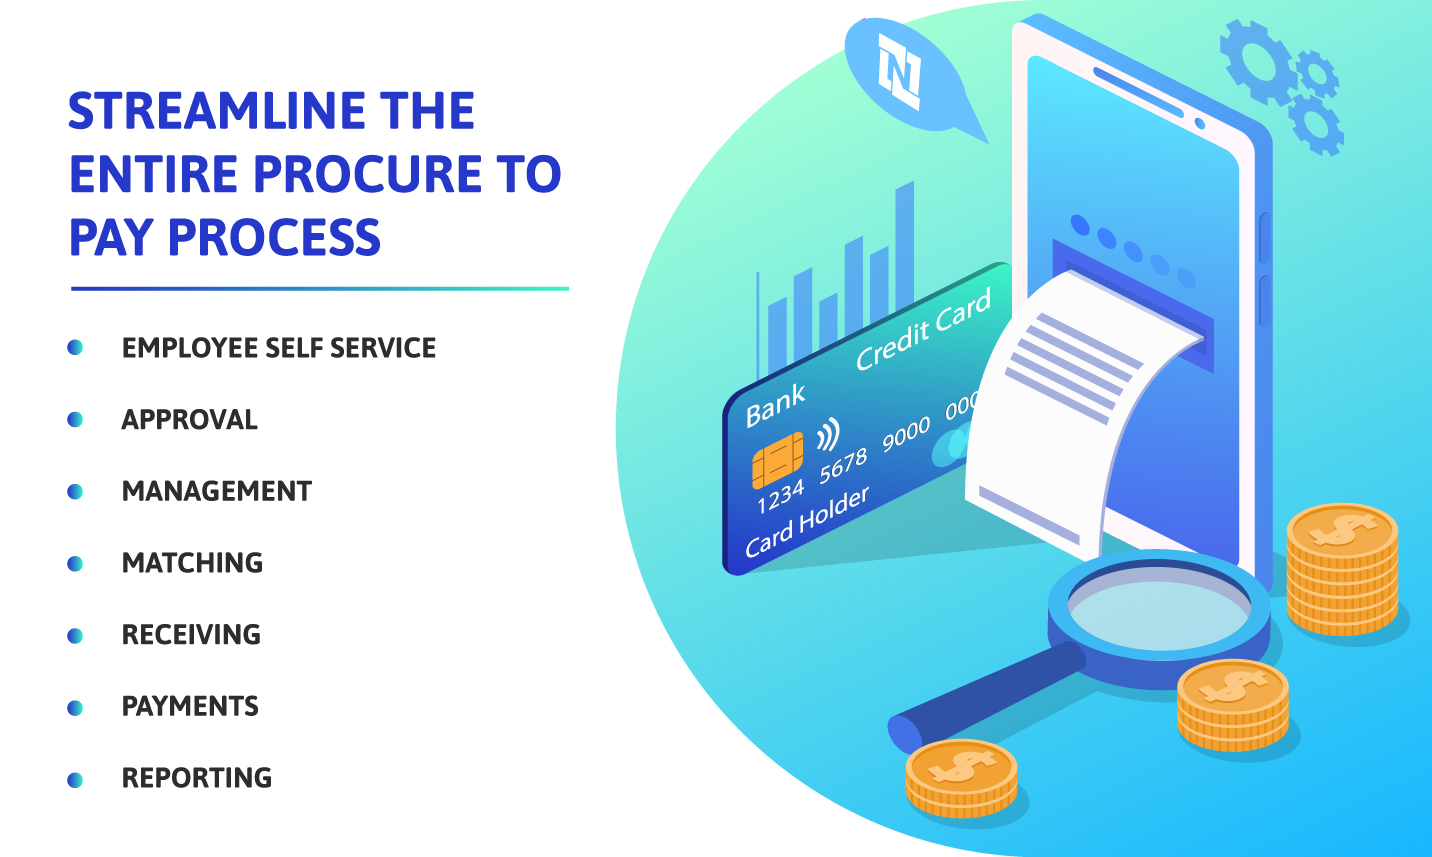 NetSuite Procure-to-Pay Software Help You